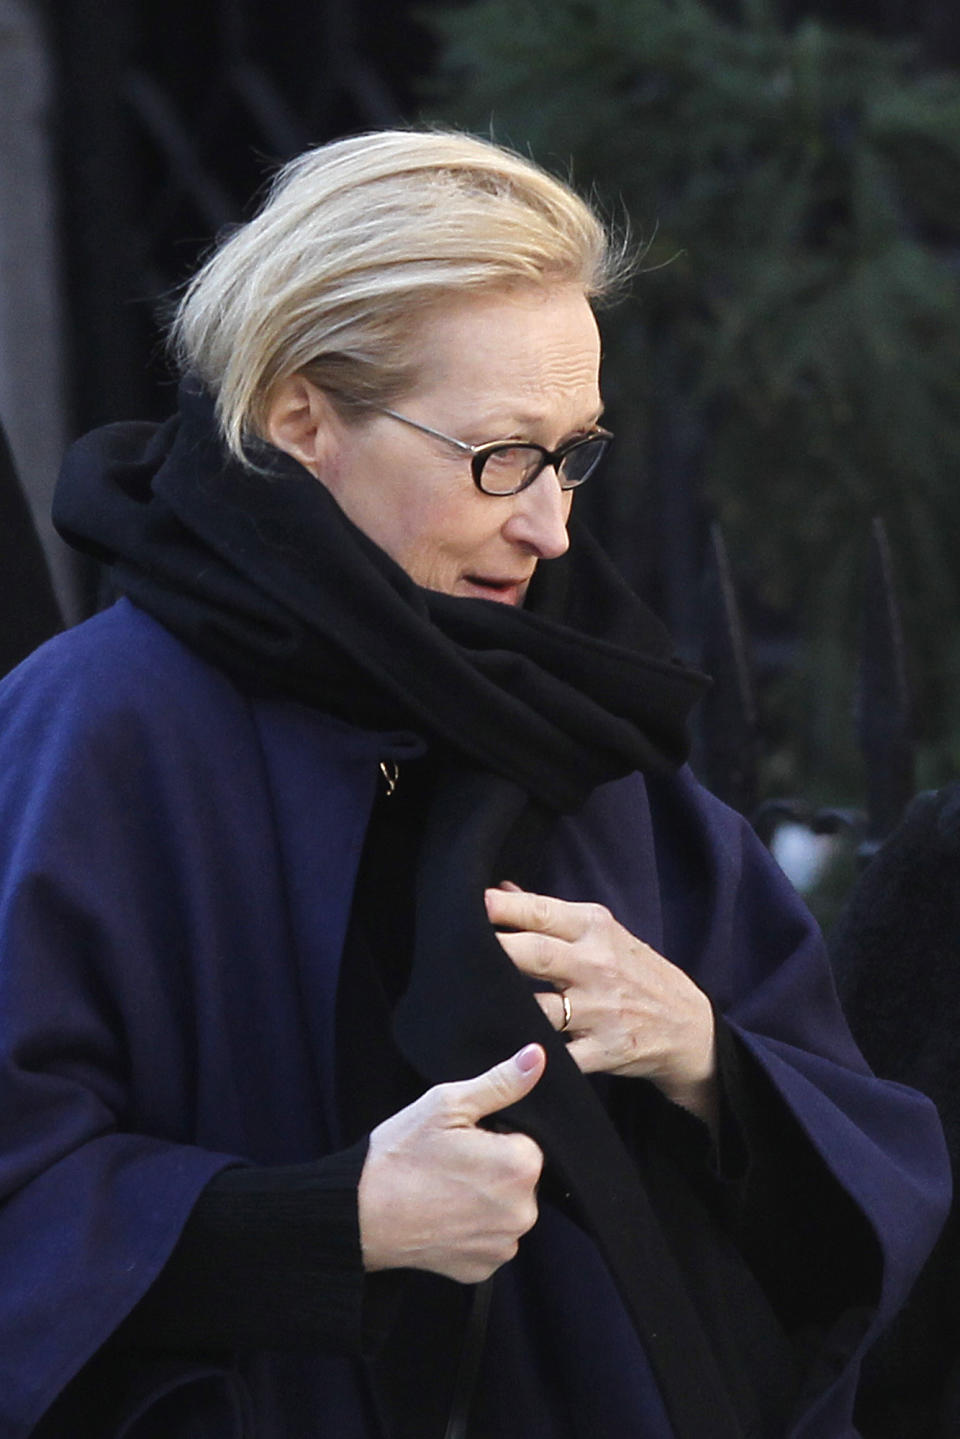 Actress Meryl Streep arrives at the Church of St. Ignatius Loyola for the private funeral of actor Philip Seymour Hoffman Friday, Feb. 7, 2014, in New York. Hoffman, 46, was found dead Sunday of an apparent heroin overdose. (AP Photo/Jason DeCrow)